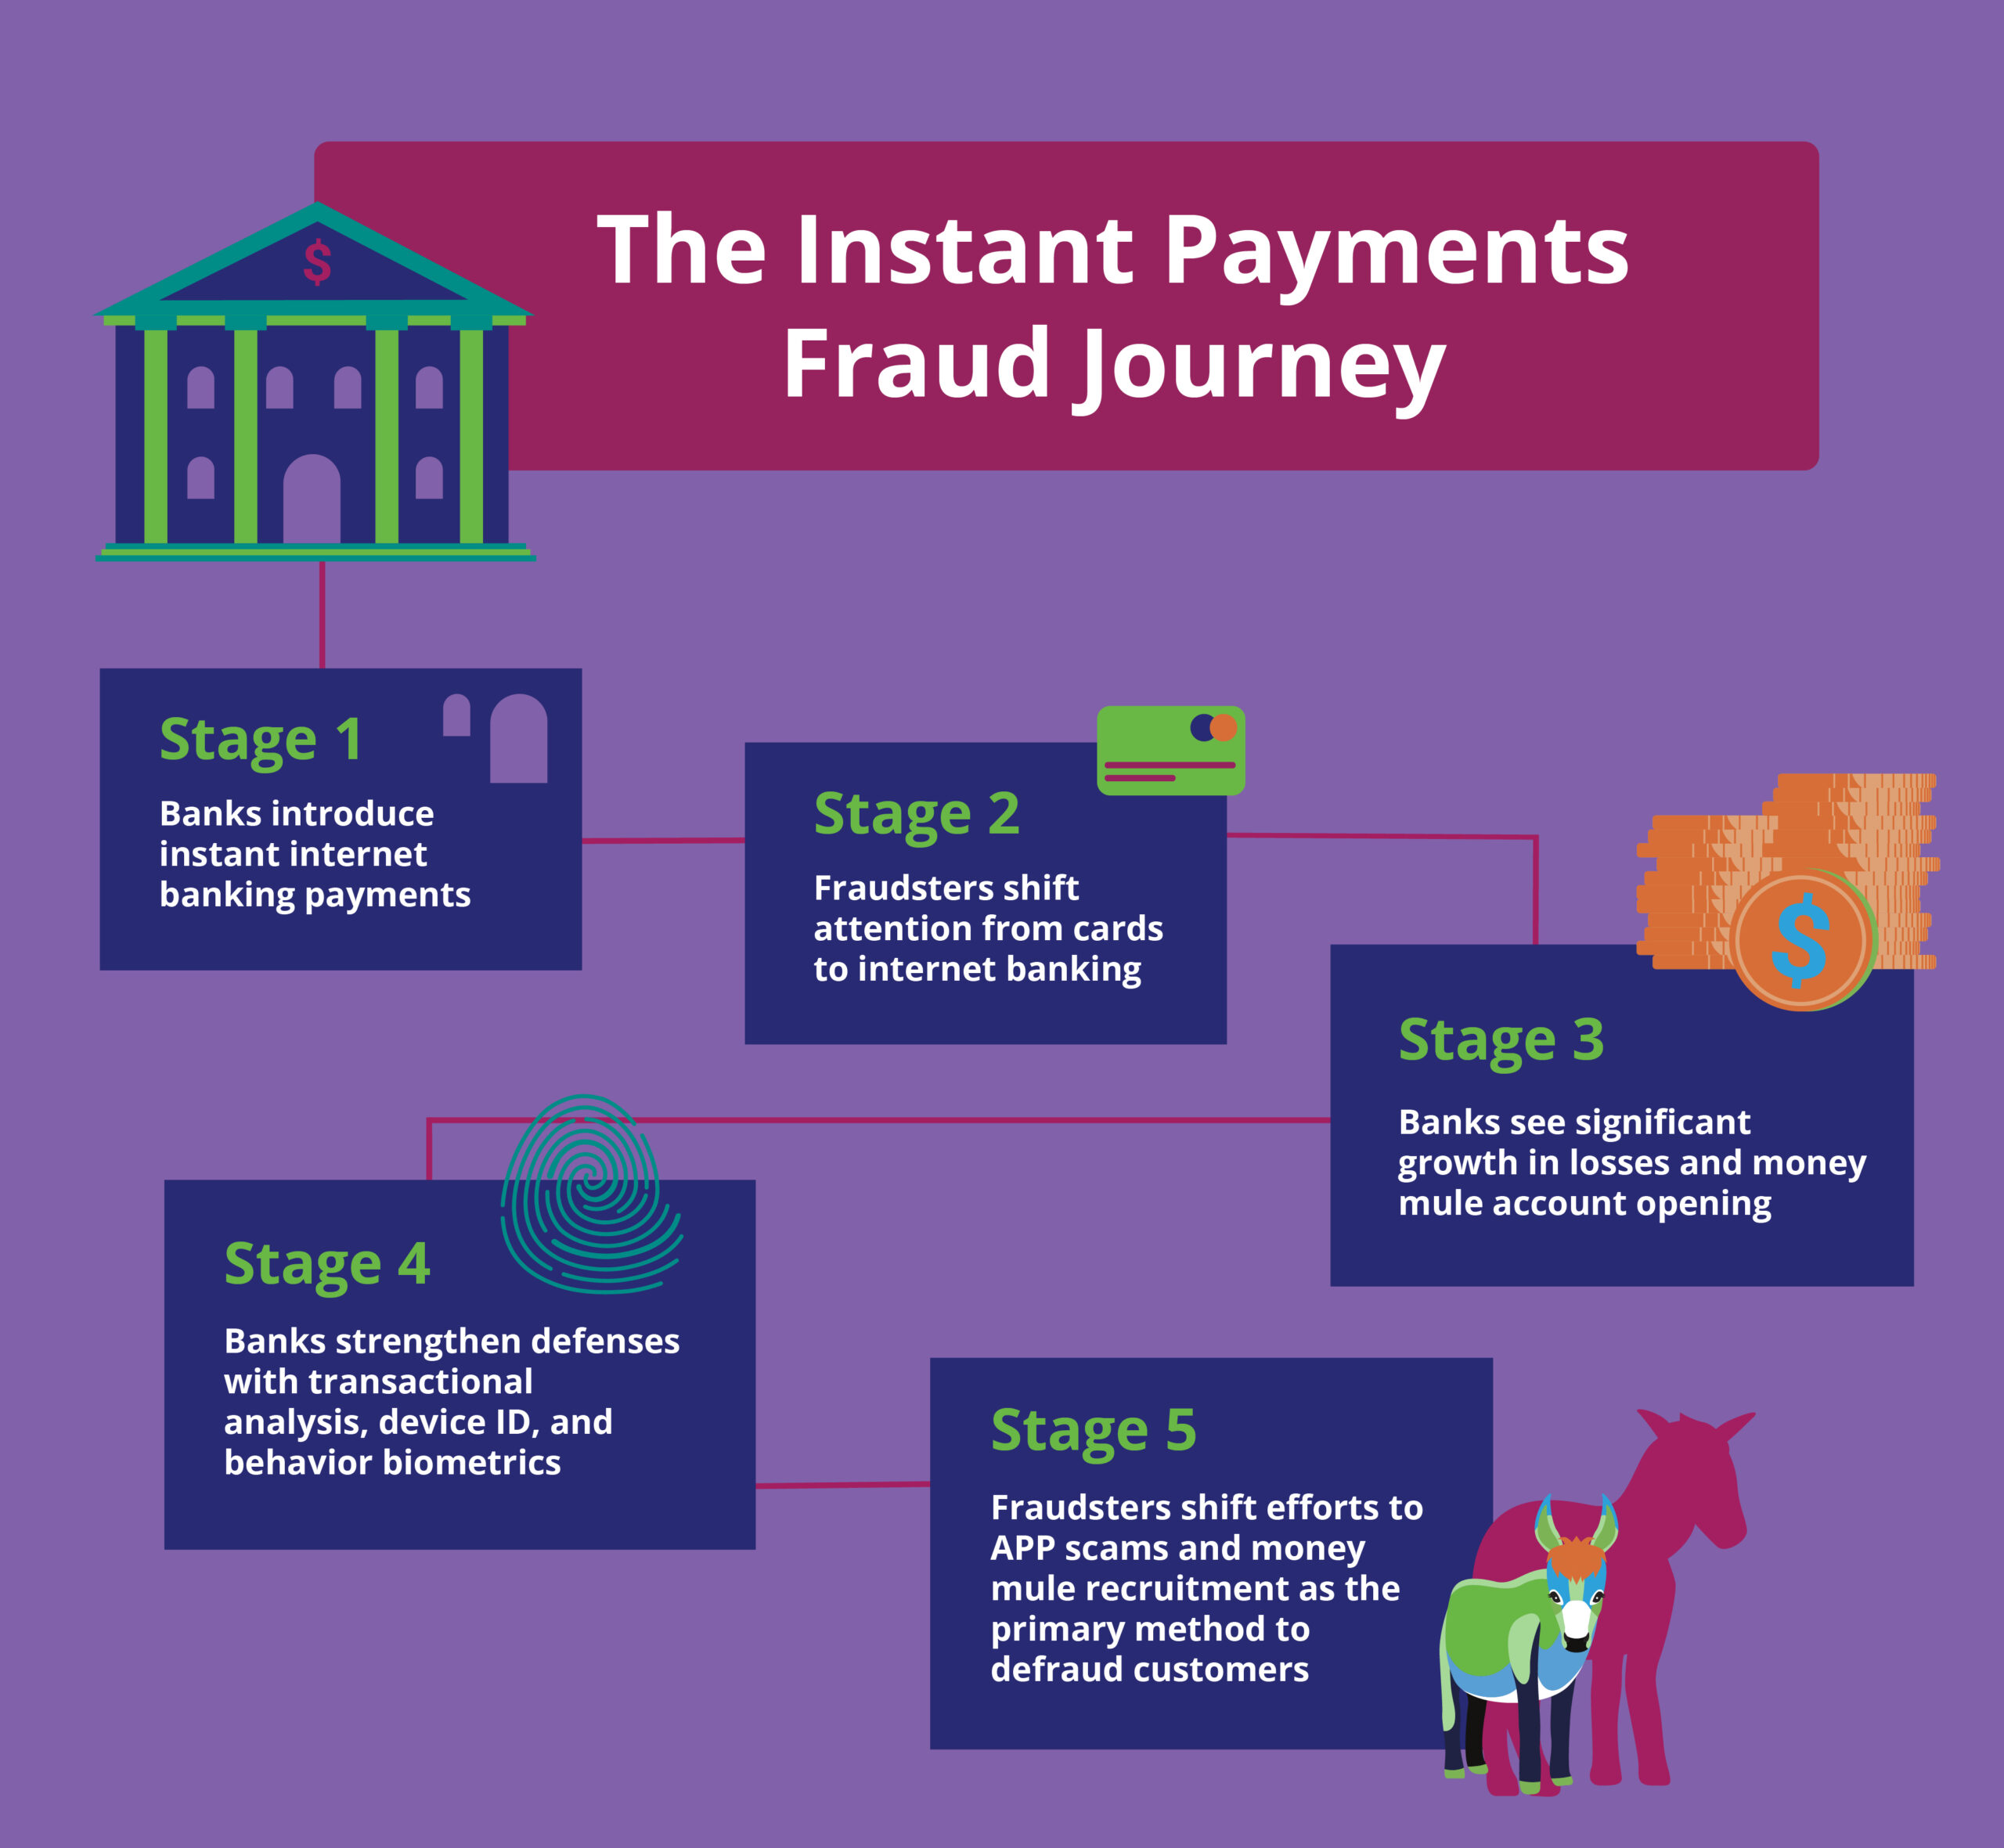 Image outlining 5 stages of Instant Payments Fraud Journey: Stage 1) Banks introduce instant internet banking payments; Stage 2) fraudsters shift attention from cards to internet banking; Stage 3) Banks see significant growth in losses and money mule account opening; Stage 4) Banks strengthen defenses with transactional analysis, device ID, and behavior biometrics; and Stage 5) Fraudsters shift efforts to APP scams and money mule recruitment as they priary method to defraud customers